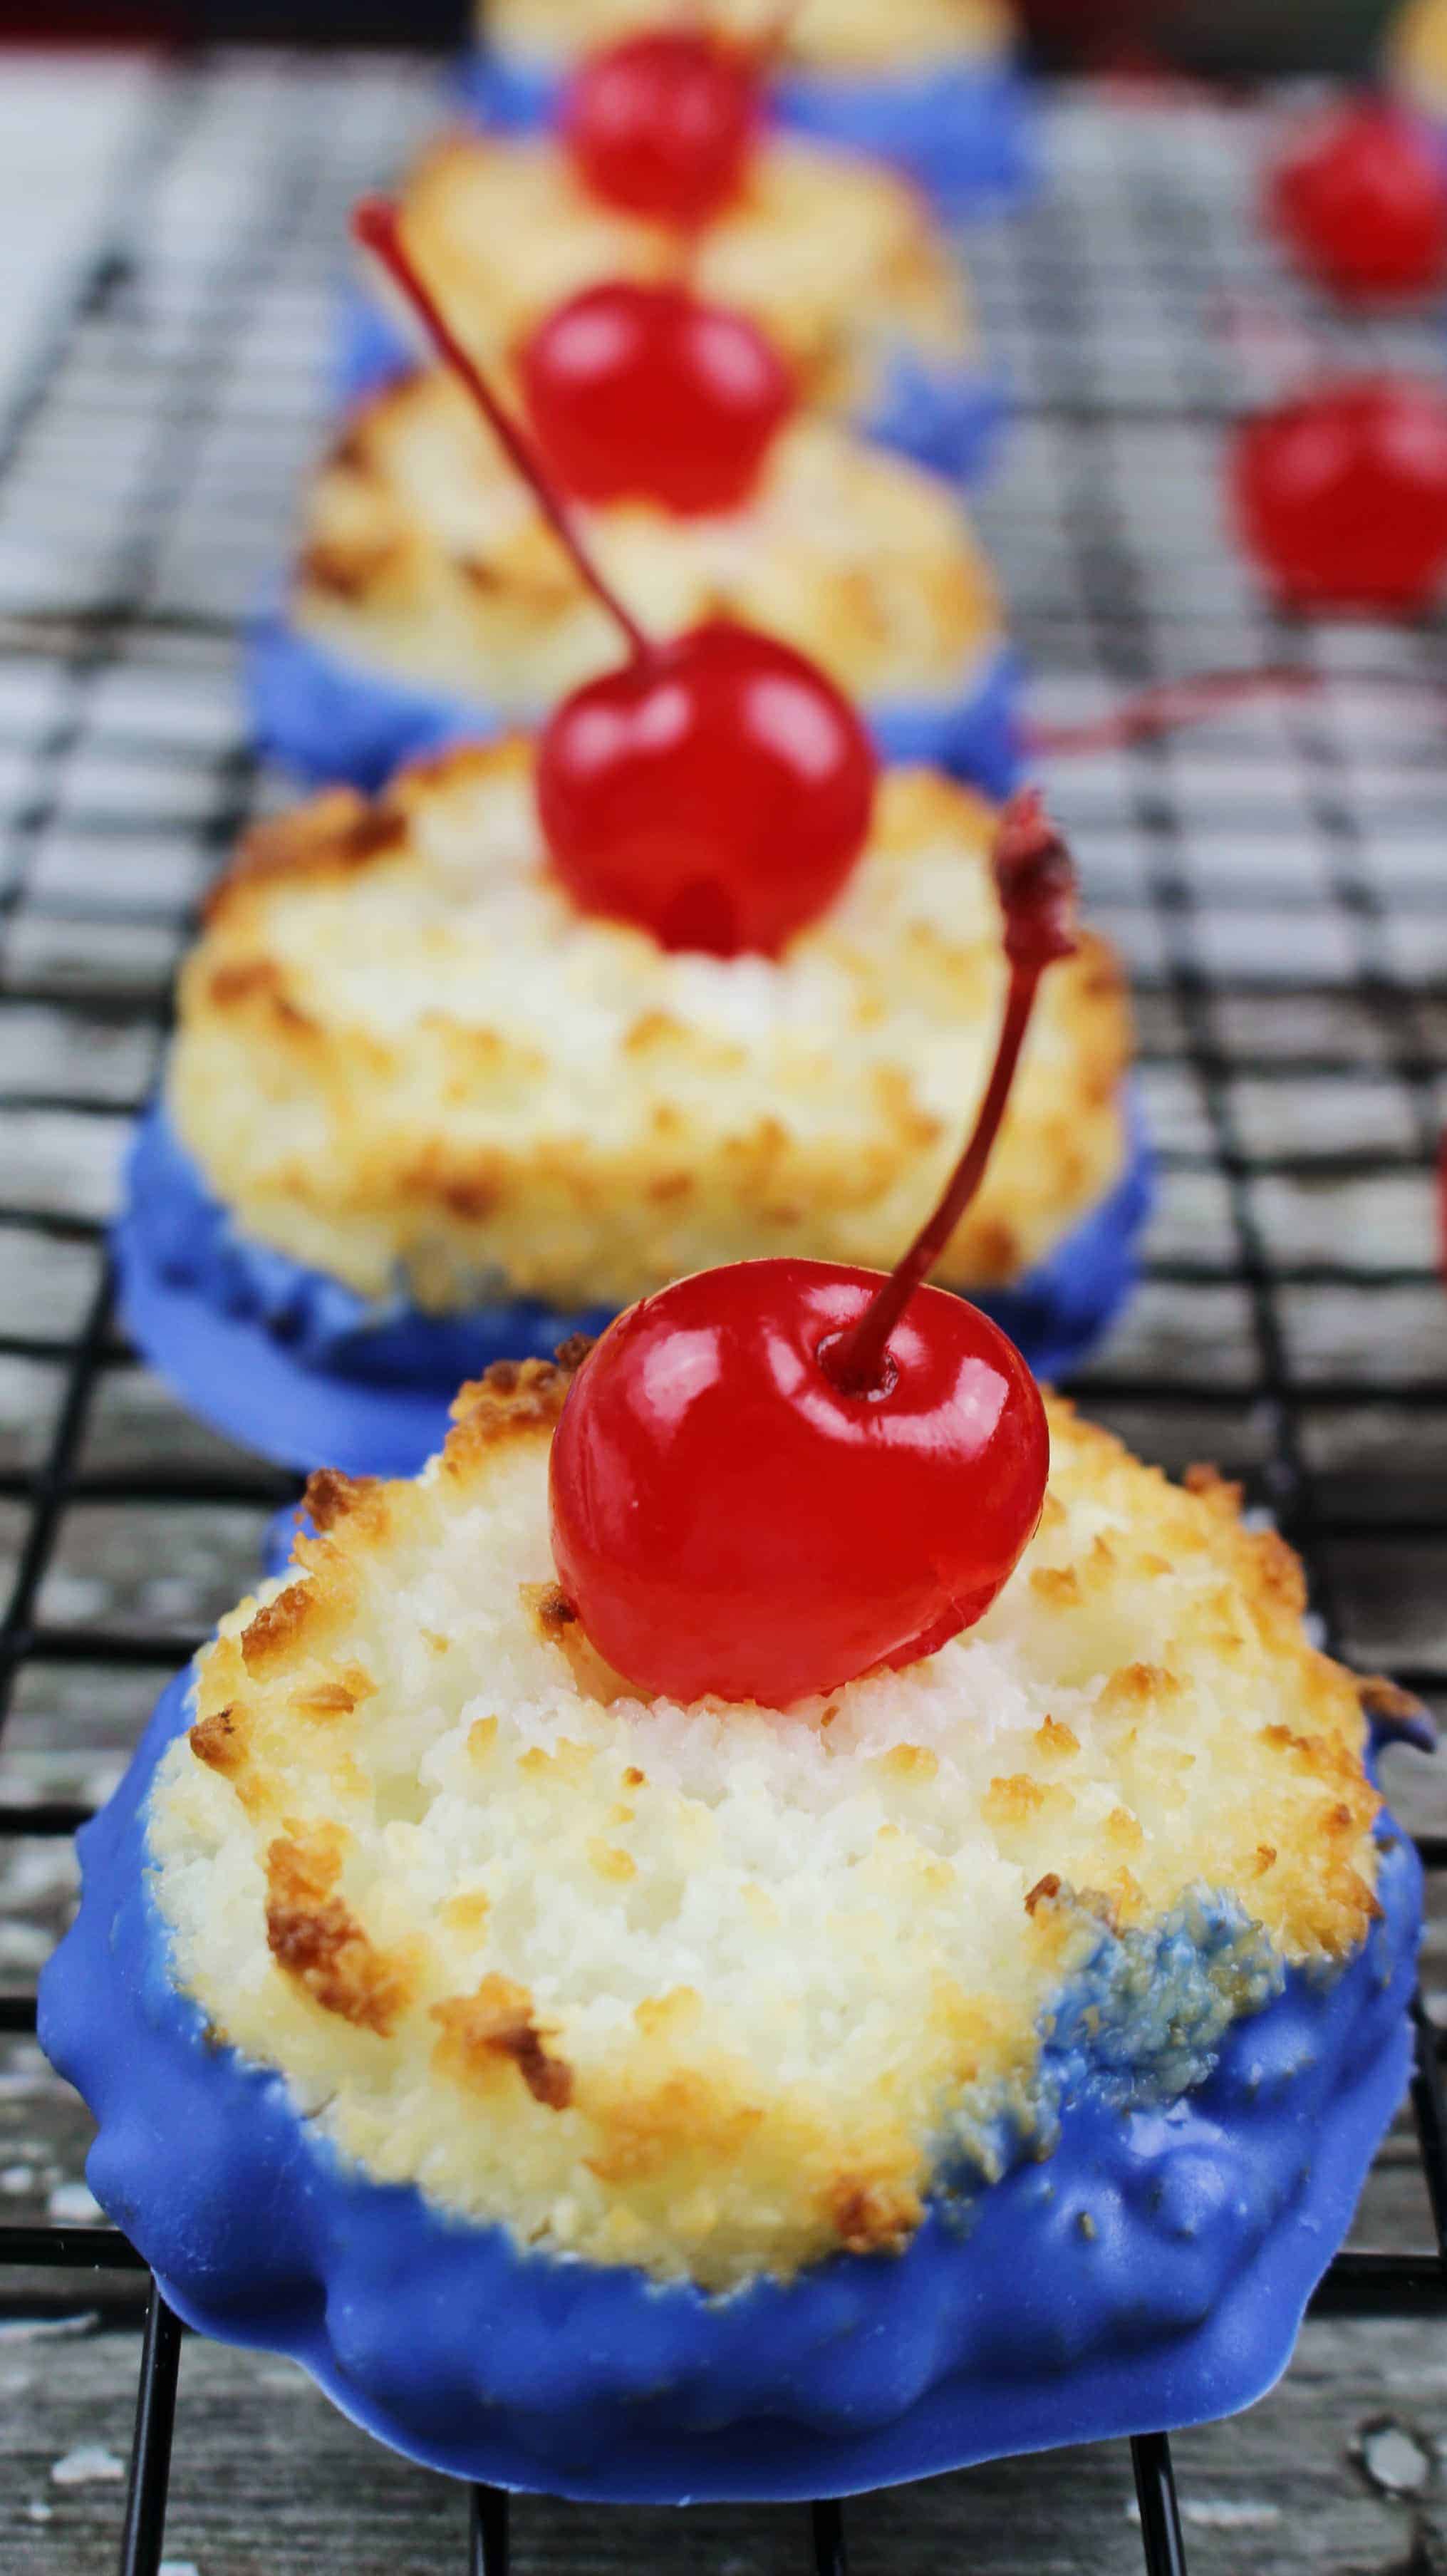 If you're looking for Memorial Day food or 4th of July food, check out these fun patriotic desserts! Coconut Macaroon Cherry Bombs incorporate red, white, and blue in the tastiest of ways.